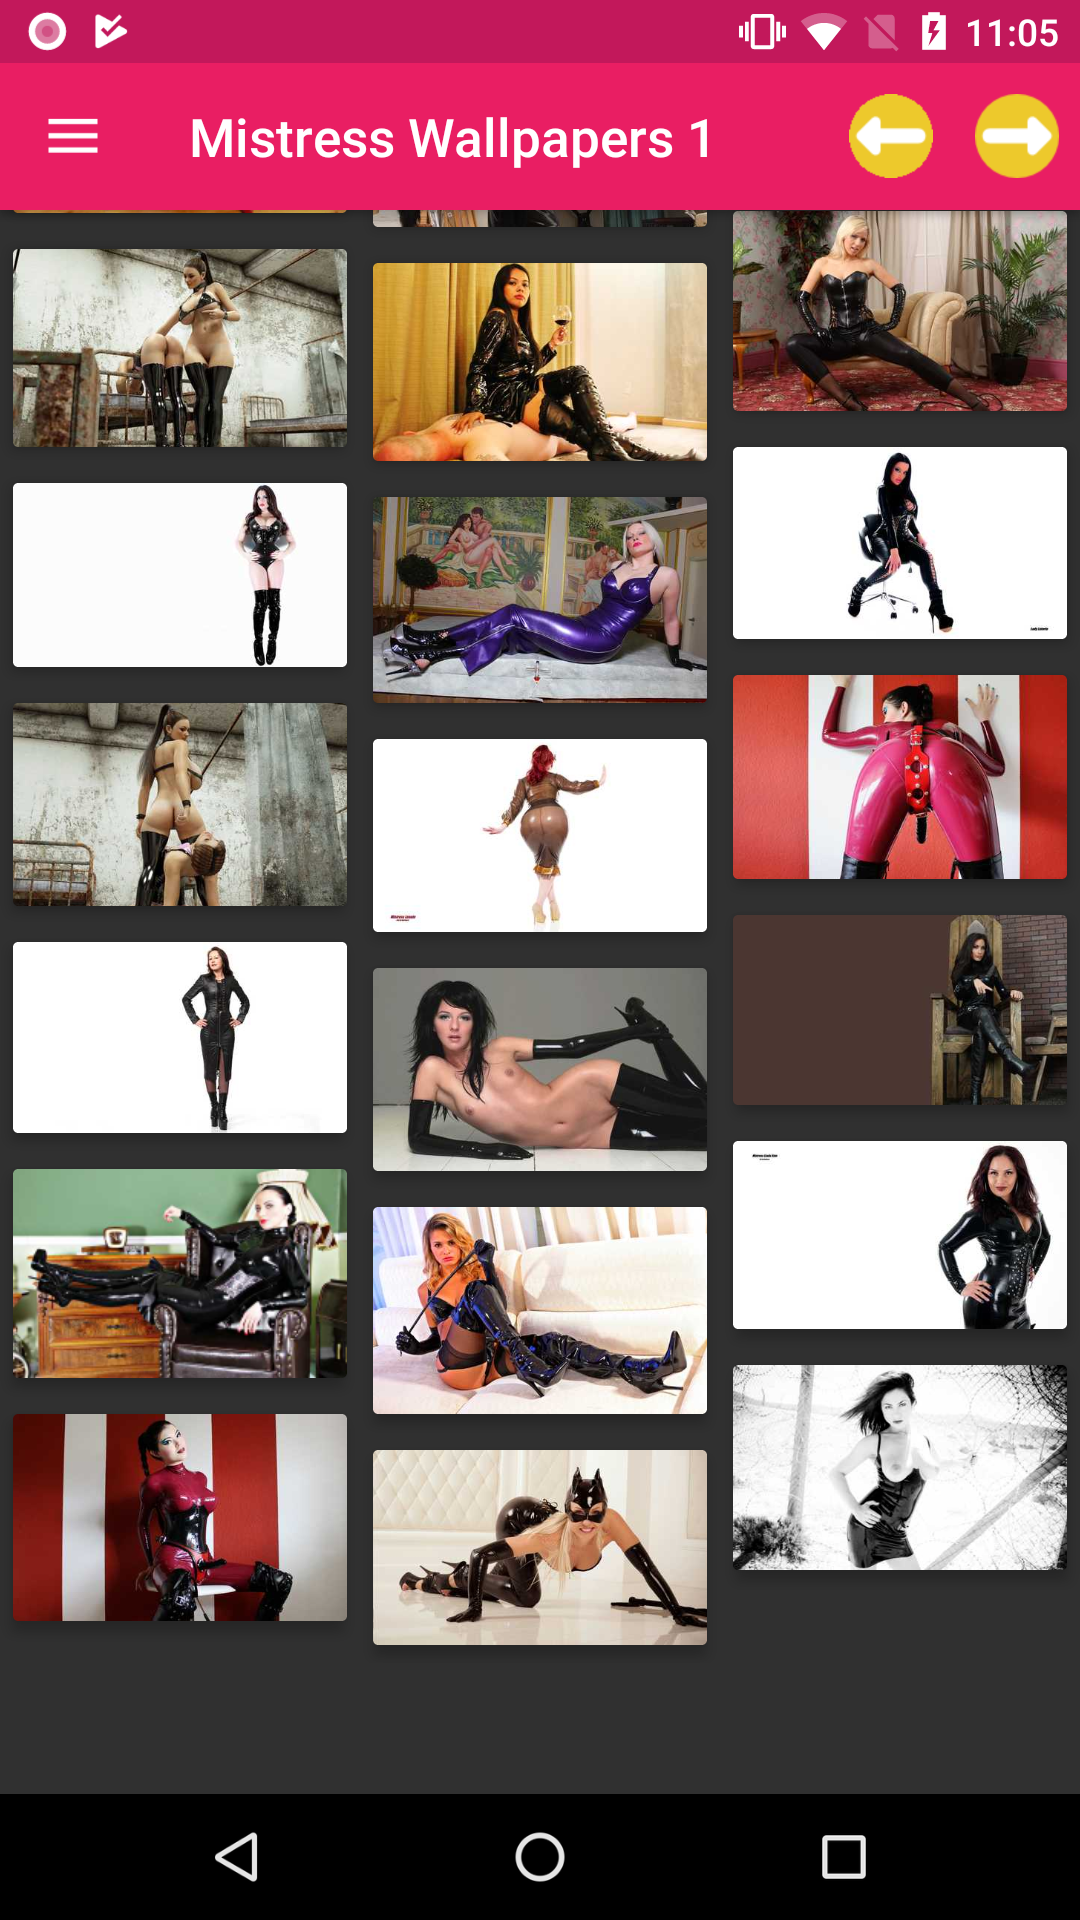 Mistress Wallpapers mistress,sexy,apk,packs,pics,images,hentai,ebony,domination,best,pornstarphoto,bdsm,porn,wallpapers,adult,android,shemales,femdom,app,apps,pictures,latex,the,download